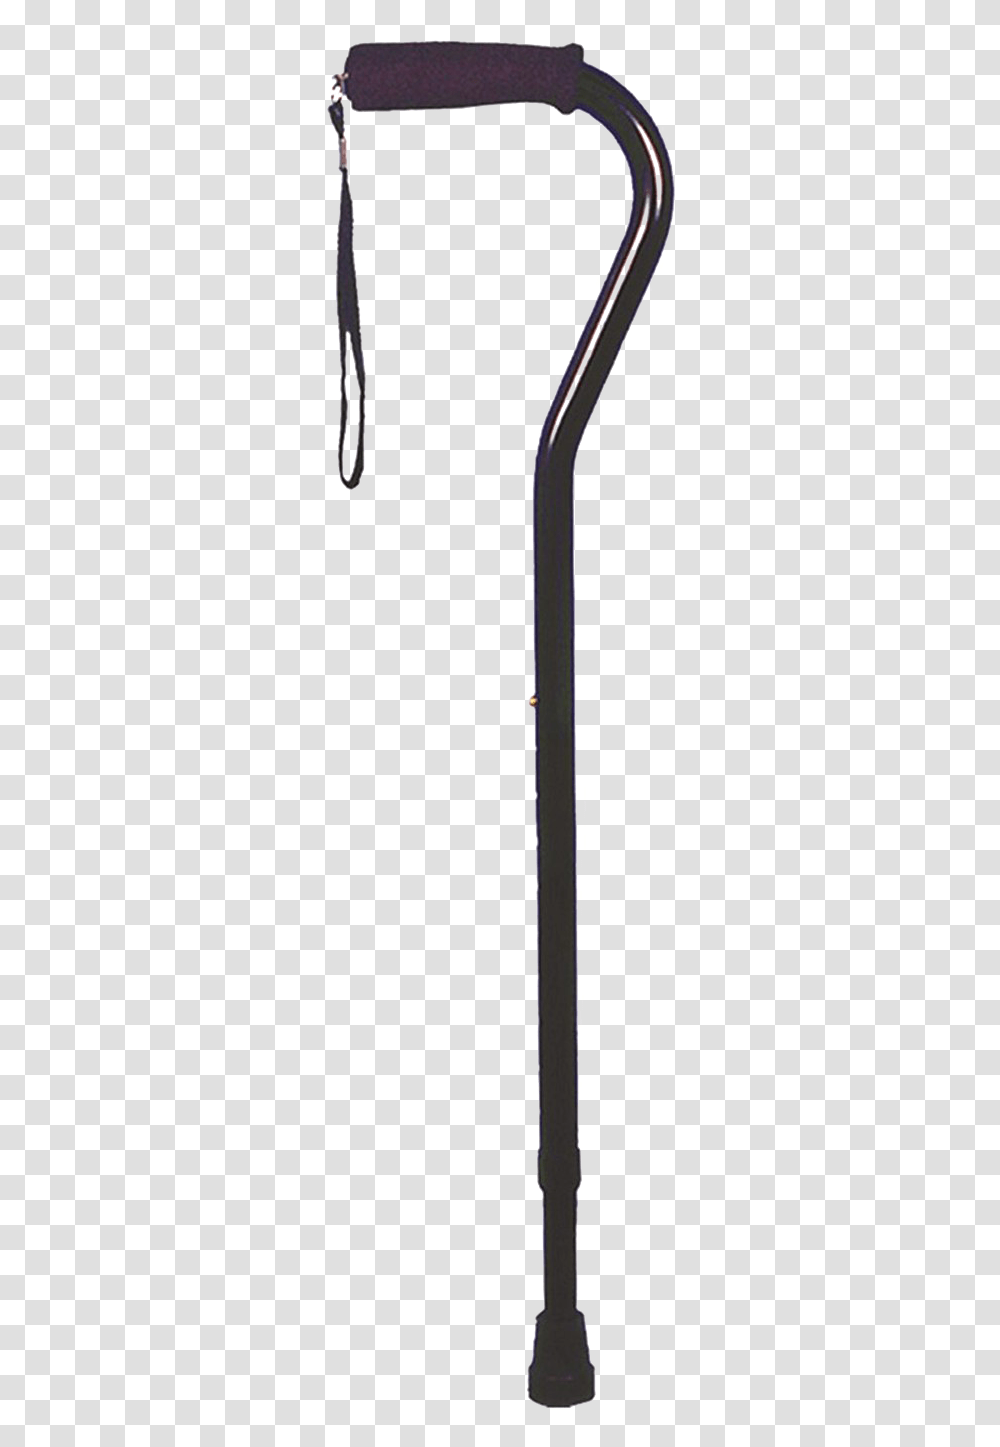 Walking Stick High Quality Image Wind Instrument, Sword, Blade, Weapon, Weaponry Transparent Png